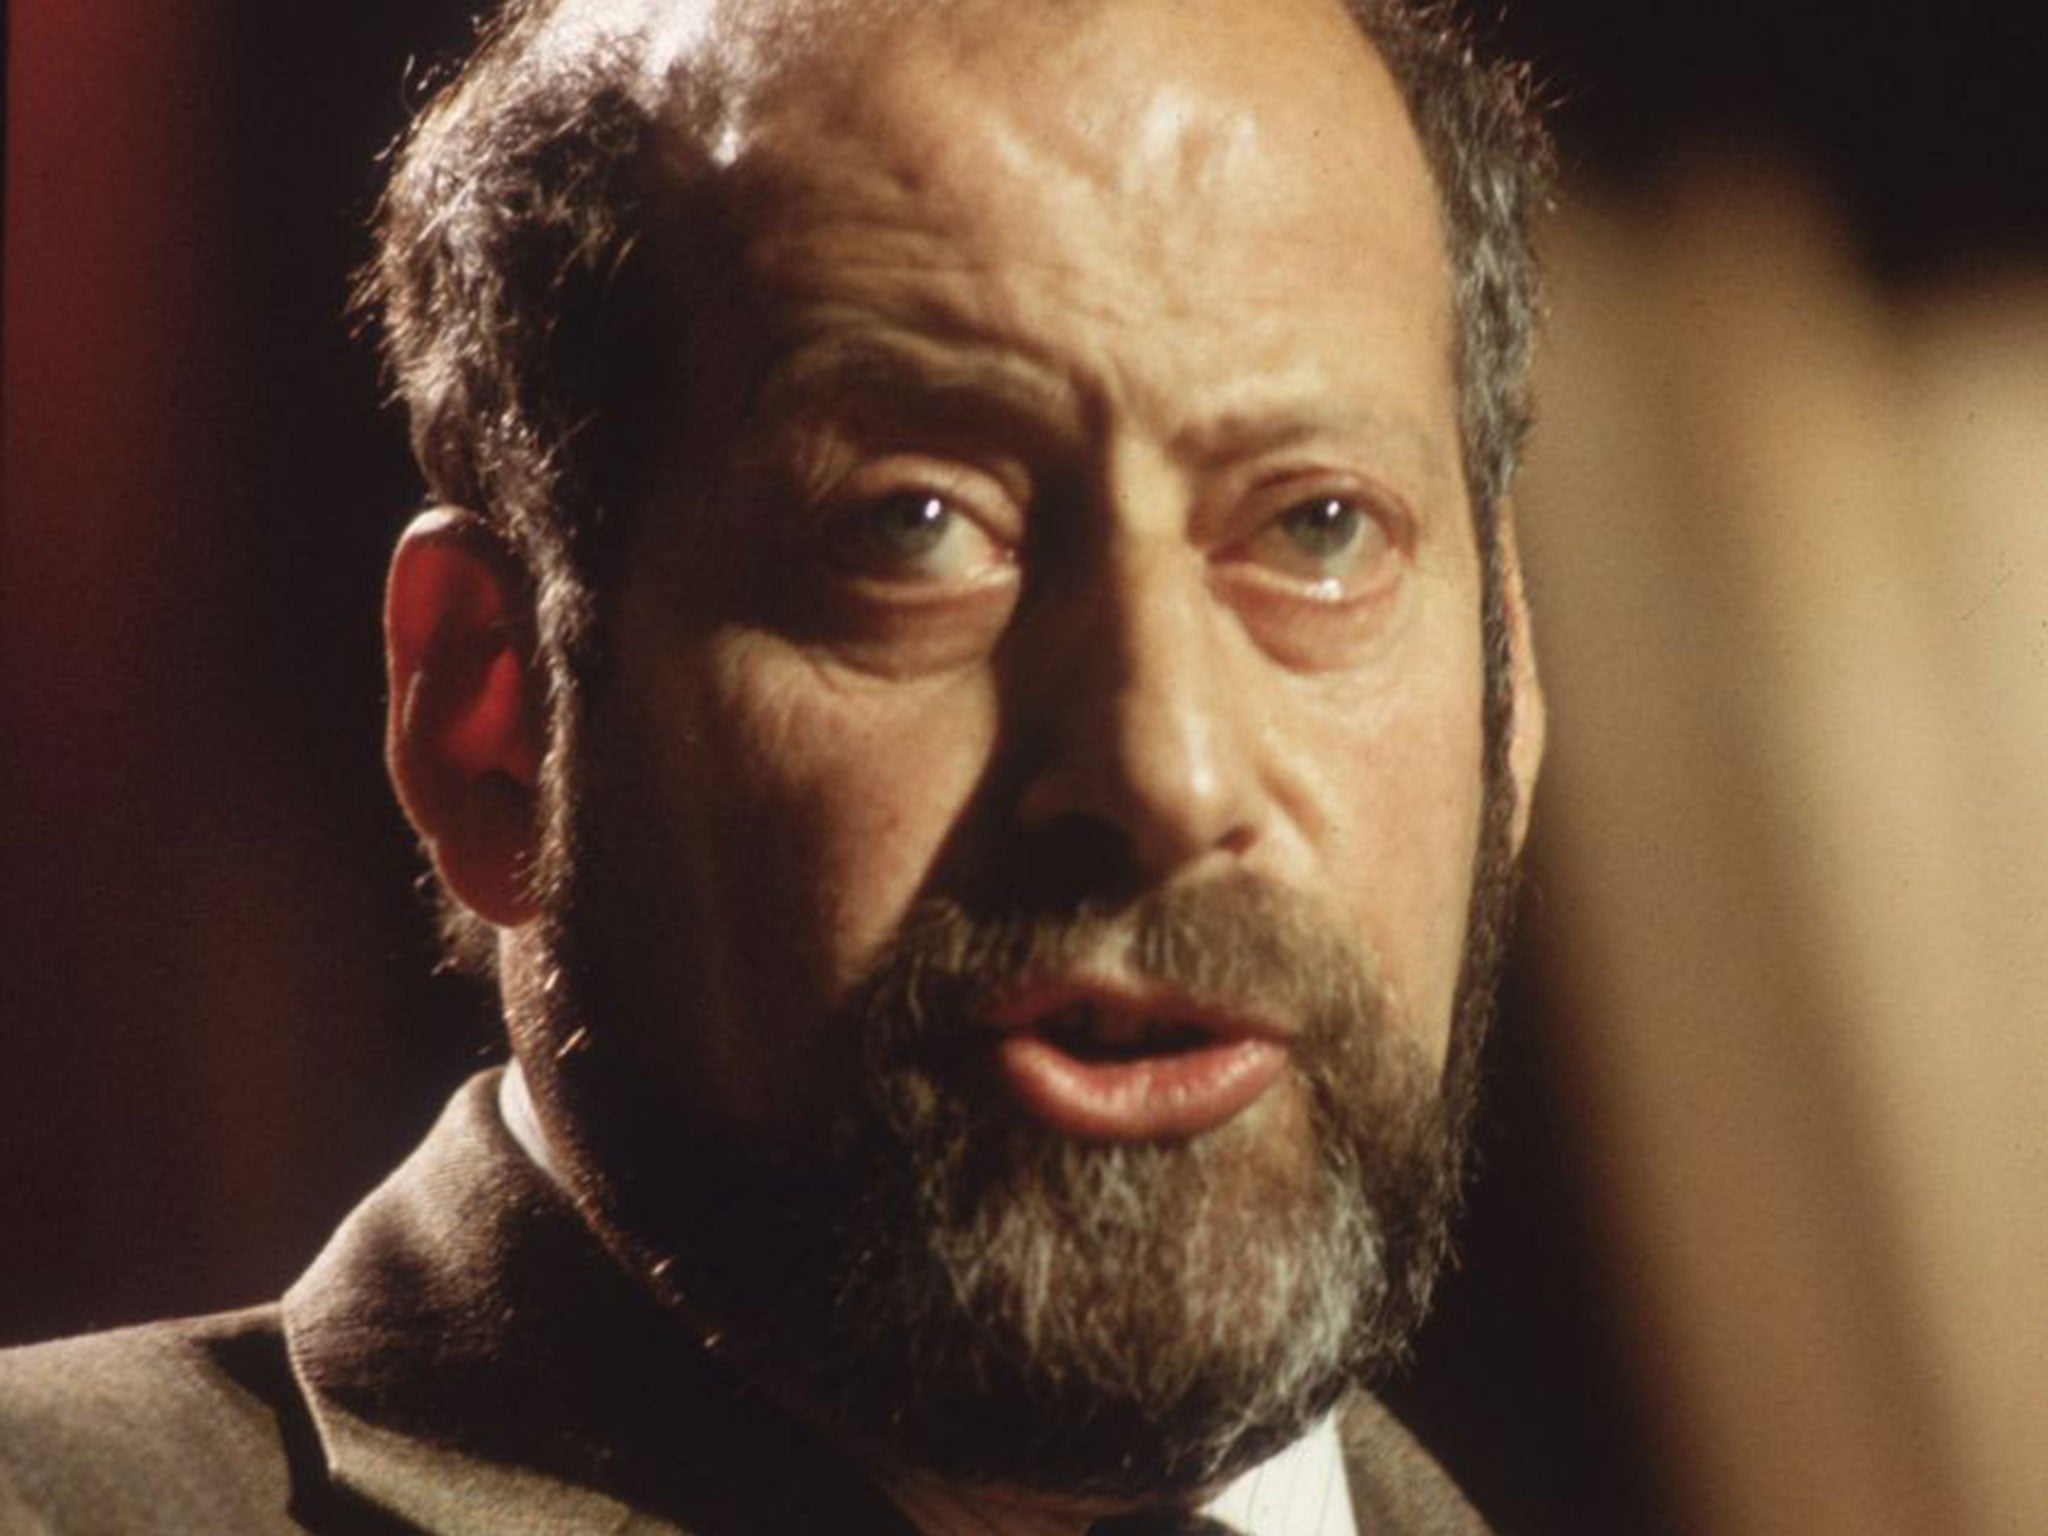 The former television personality and celebrity chef, Clement Freud